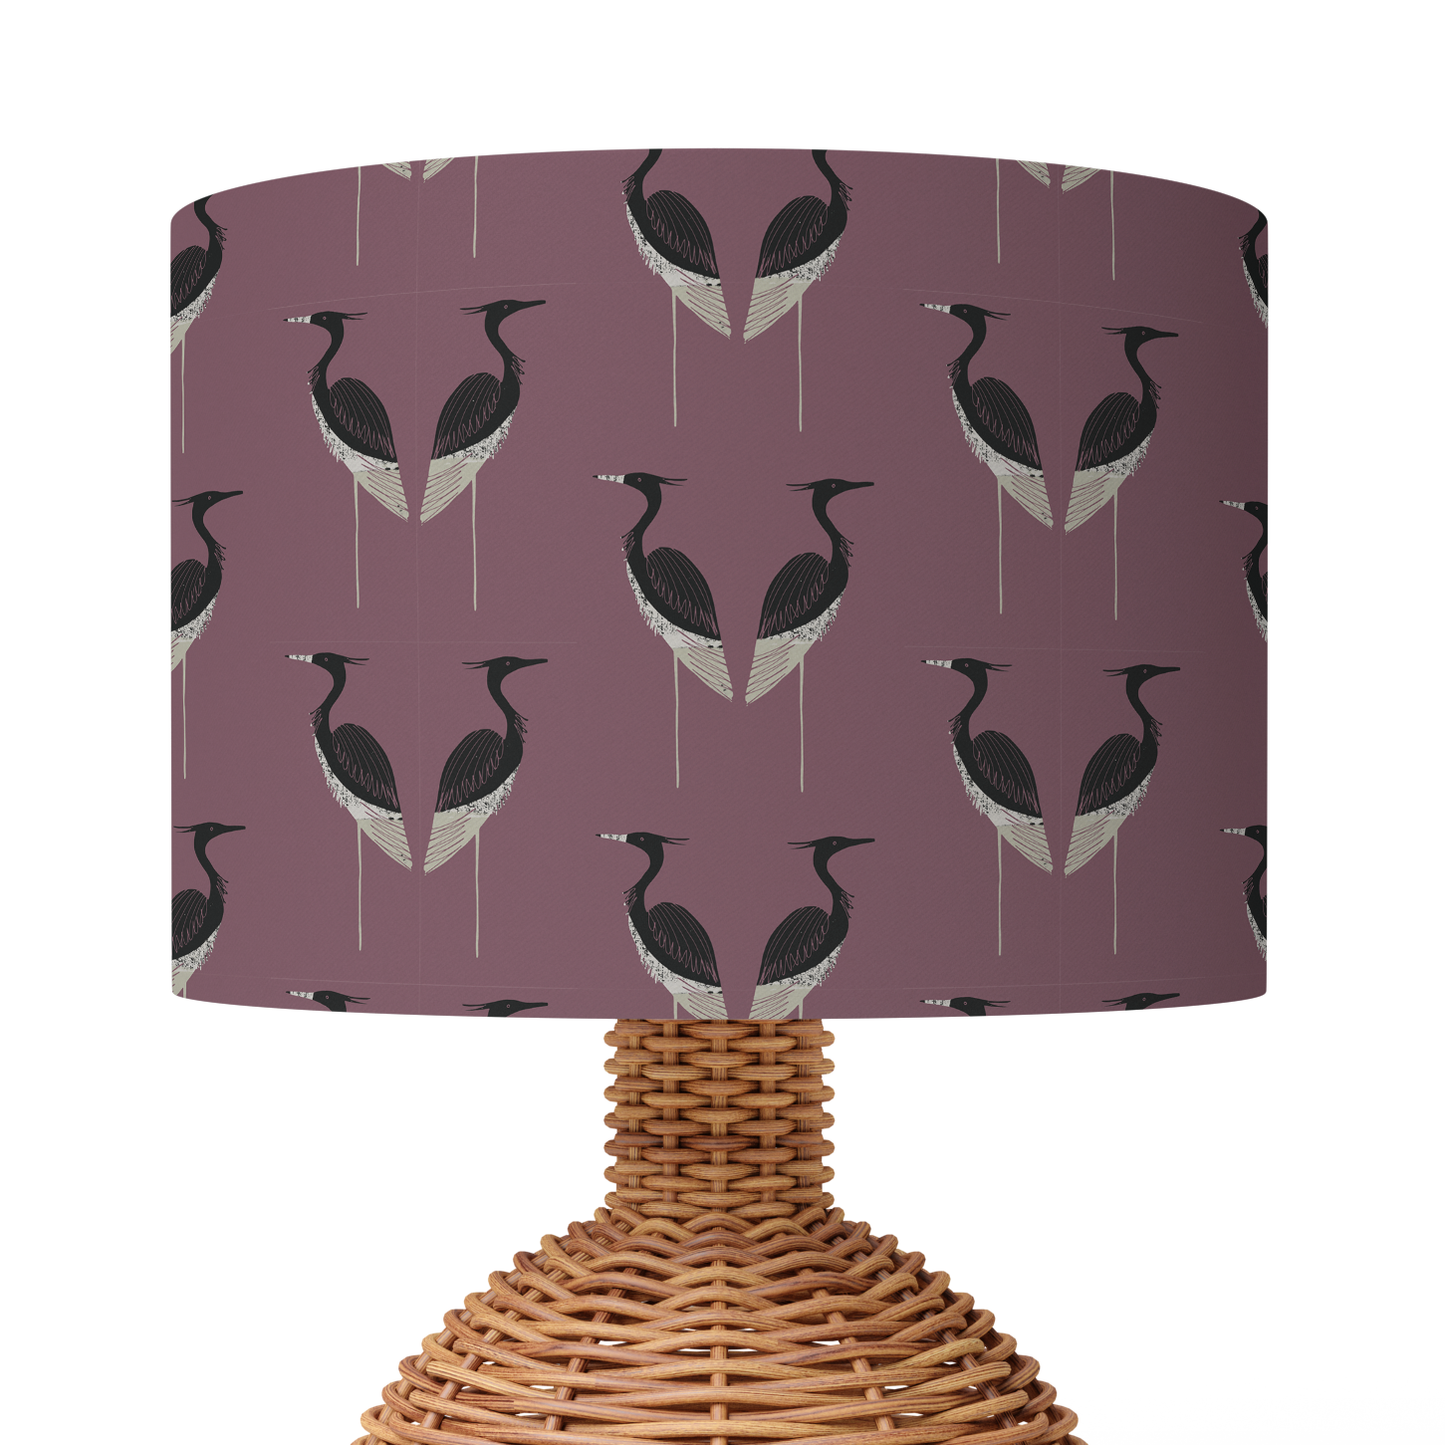 Heron Lampshade (Ceiling/Pendant or Table)